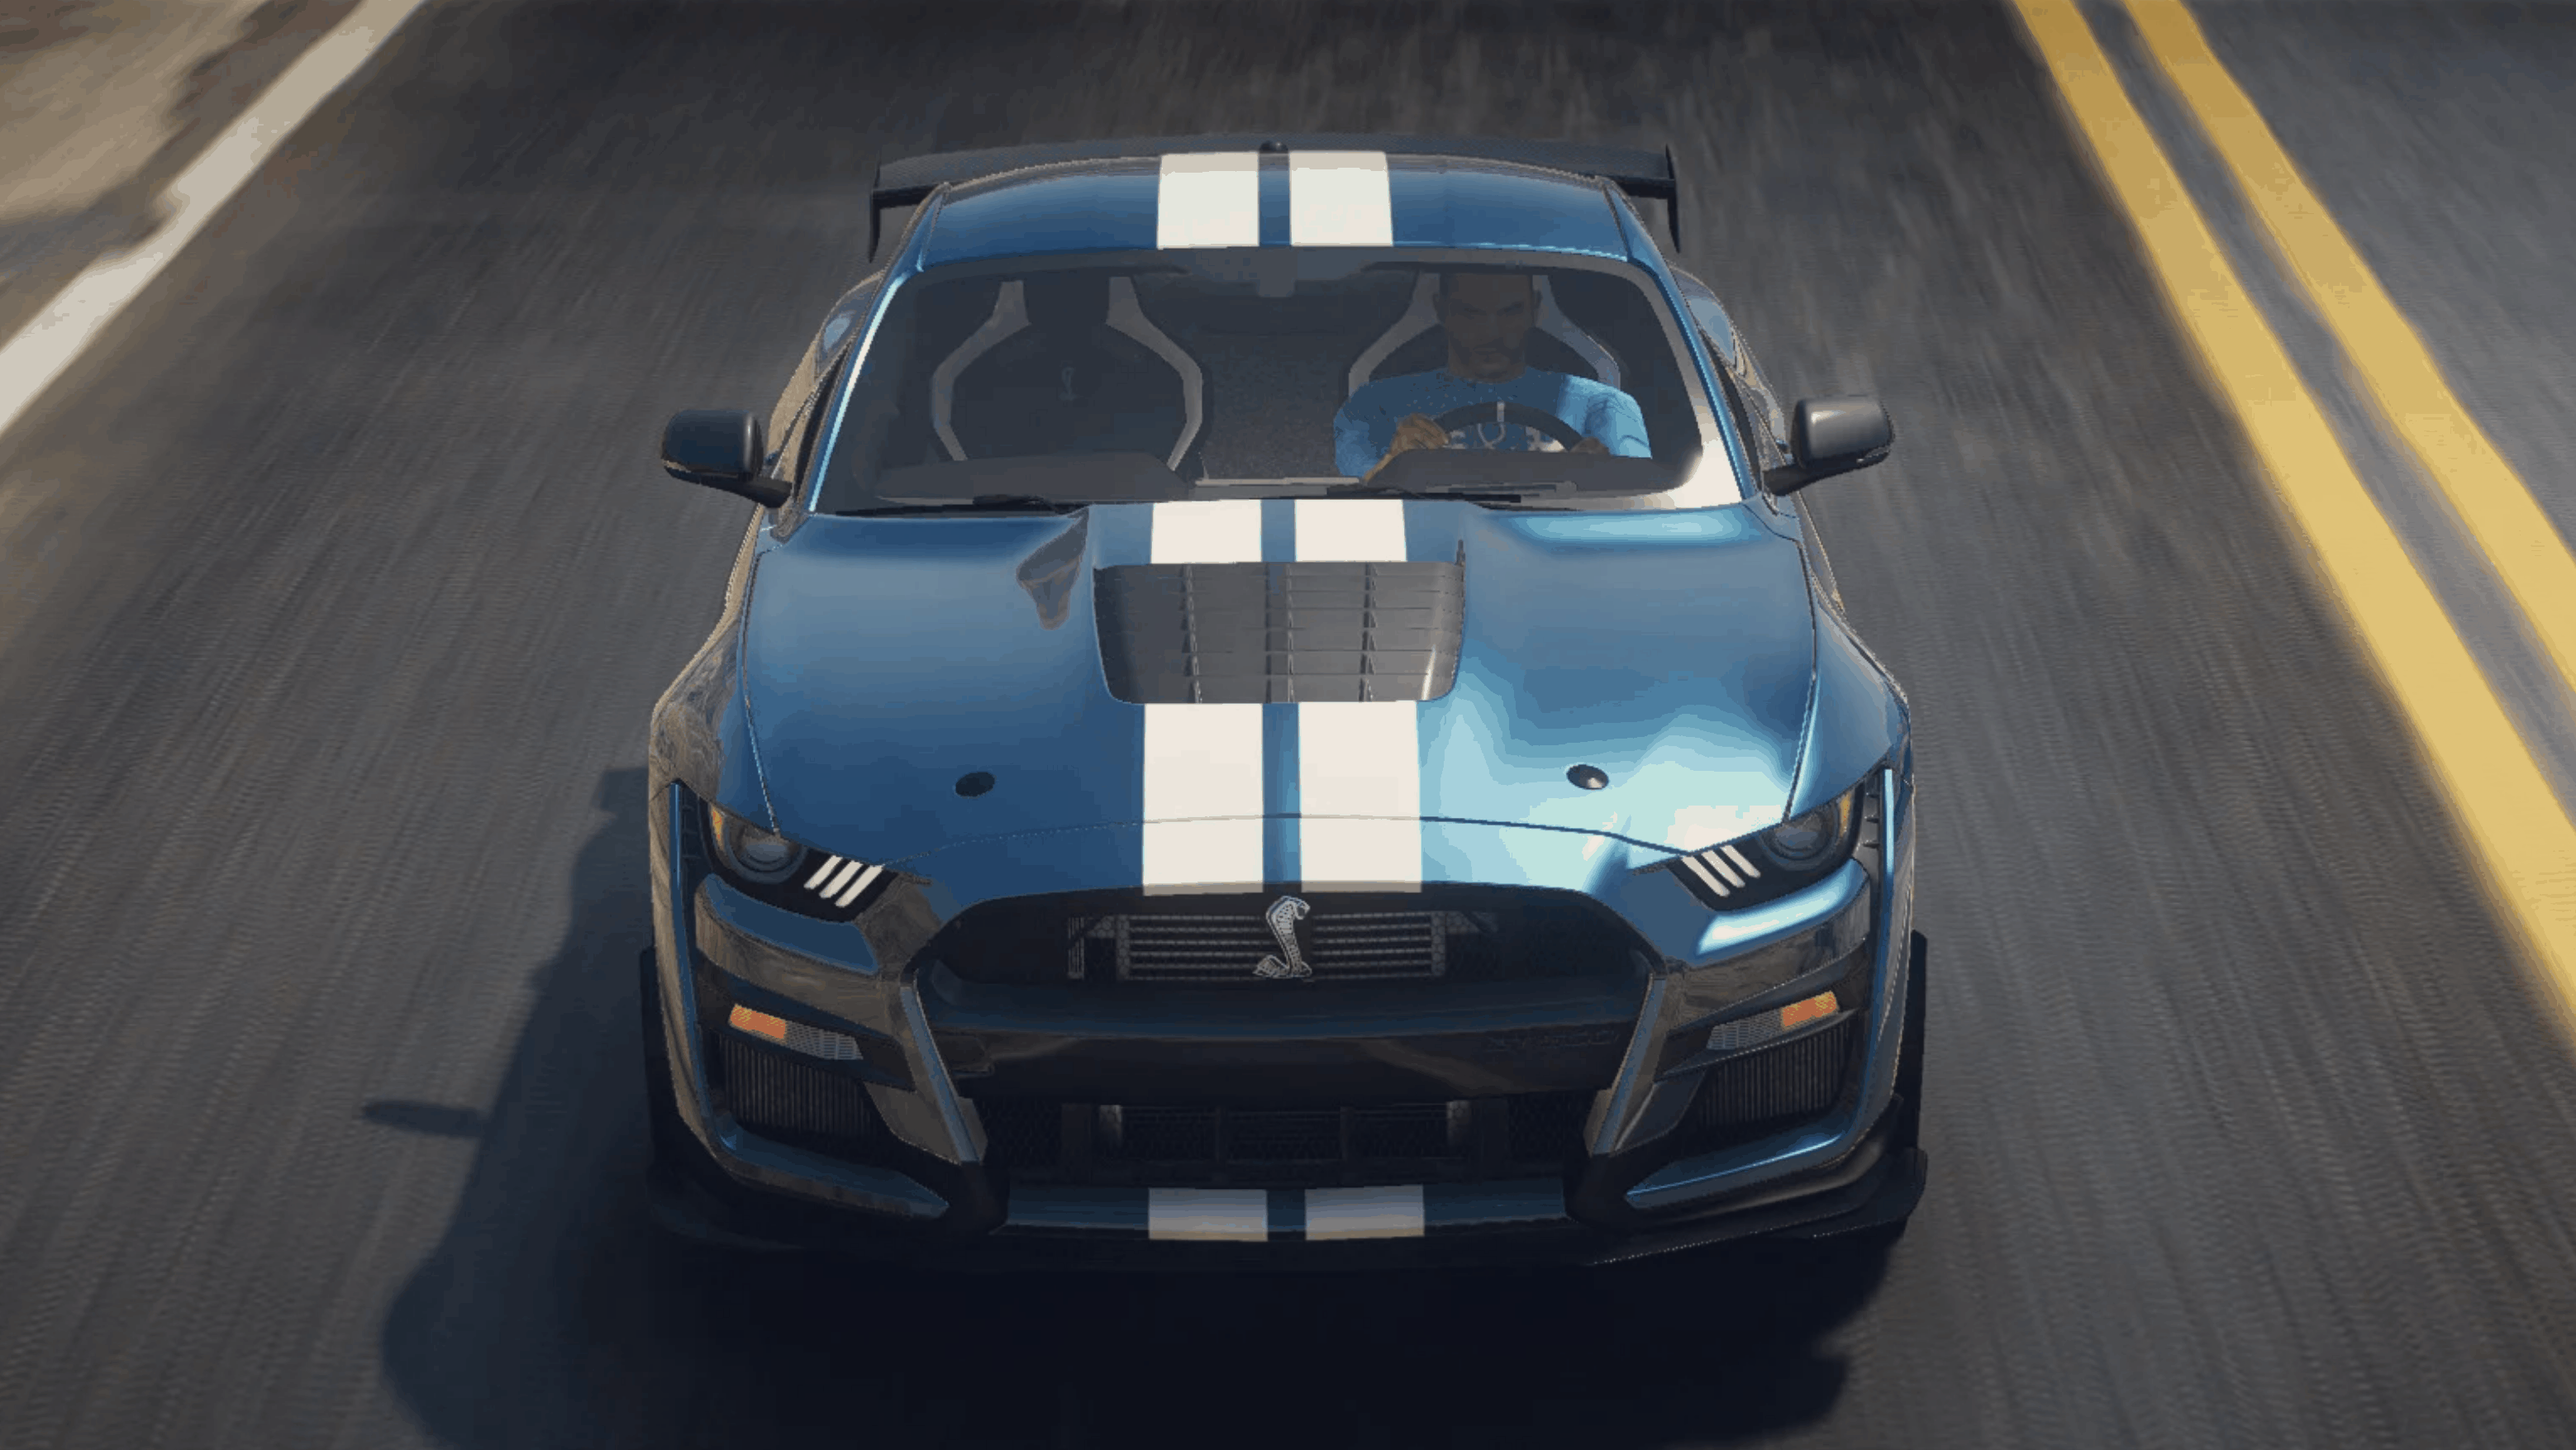 Ford Mustang Shelby Gt500 2020 10 Gta 5 Mod Grand Theft Auto 5 Mod